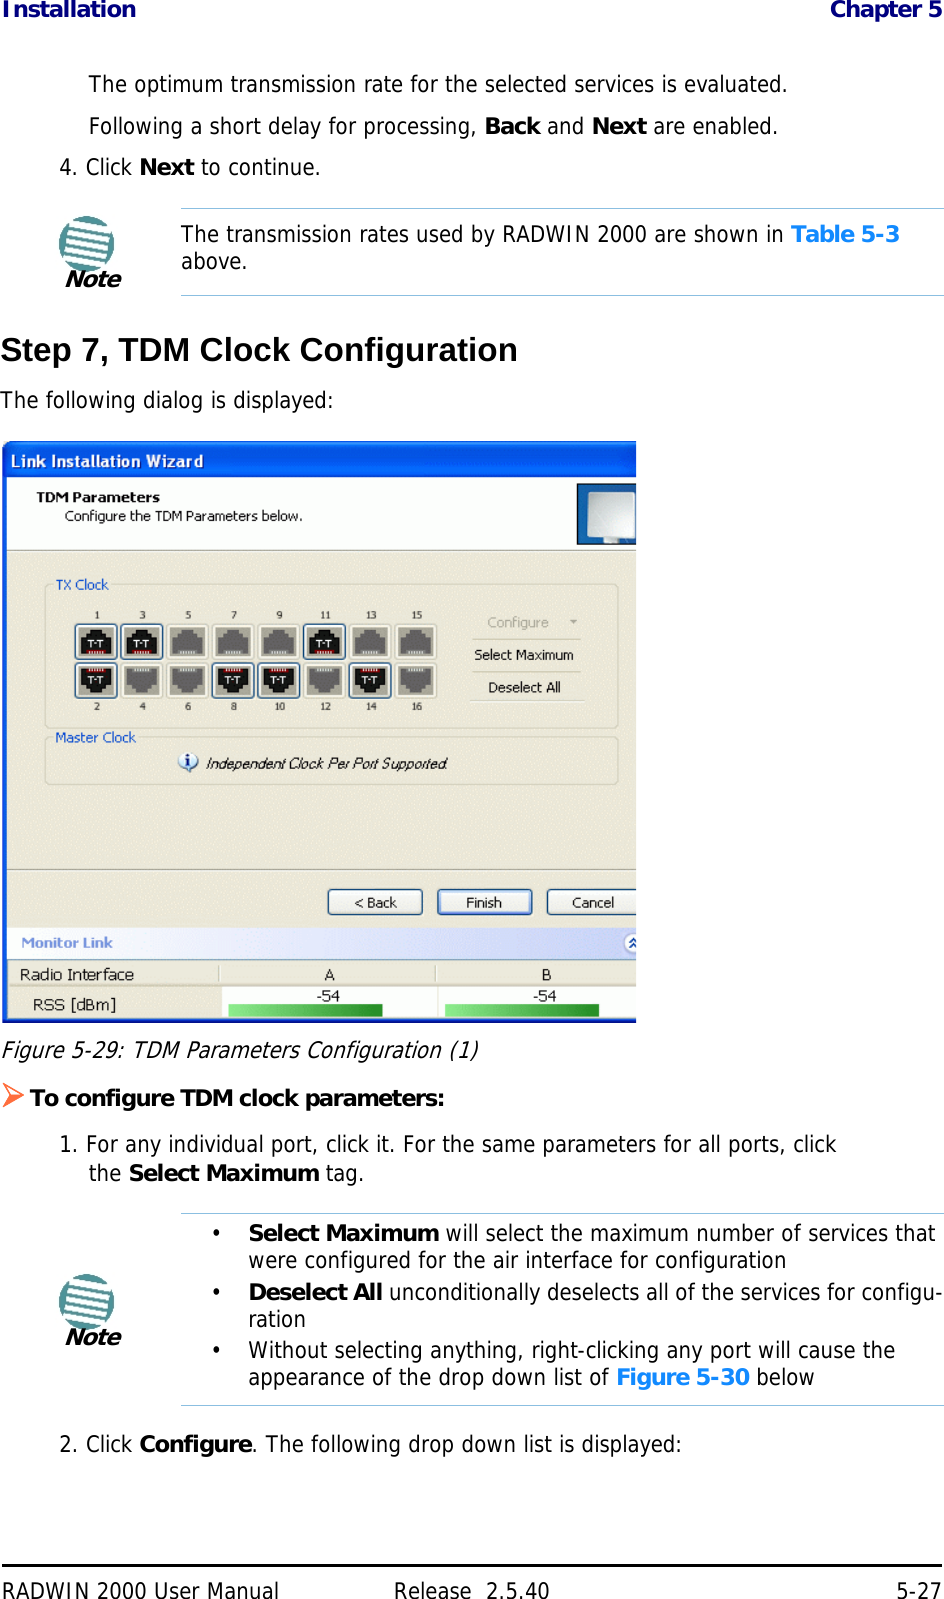 Installation Chapter 5RADWIN 2000 User Manual Release  2.5.40 5-27The optimum transmission rate for the selected services is evaluated.Following a short delay for processing, Back and Next are enabled.4. Click Next to continue.Step 7, TDM Clock ConfigurationThe following dialog is displayed:Figure 5-29: TDM Parameters Configuration (1)To configure TDM clock parameters:1. For any individual port, click it. For the same parameters for all ports, click the Select Maximum tag.2. Click Configure. The following drop down list is displayed:NoteThe transmission rates used by RADWIN 2000 are shown in Table 5-3 above.Note•Select Maximum will select the maximum number of services that were configured for the air interface for configuration•Deselect All unconditionally deselects all of the services for configu-ration• Without selecting anything, right-clicking any port will cause the appearance of the drop down list of Figure 5-30 below